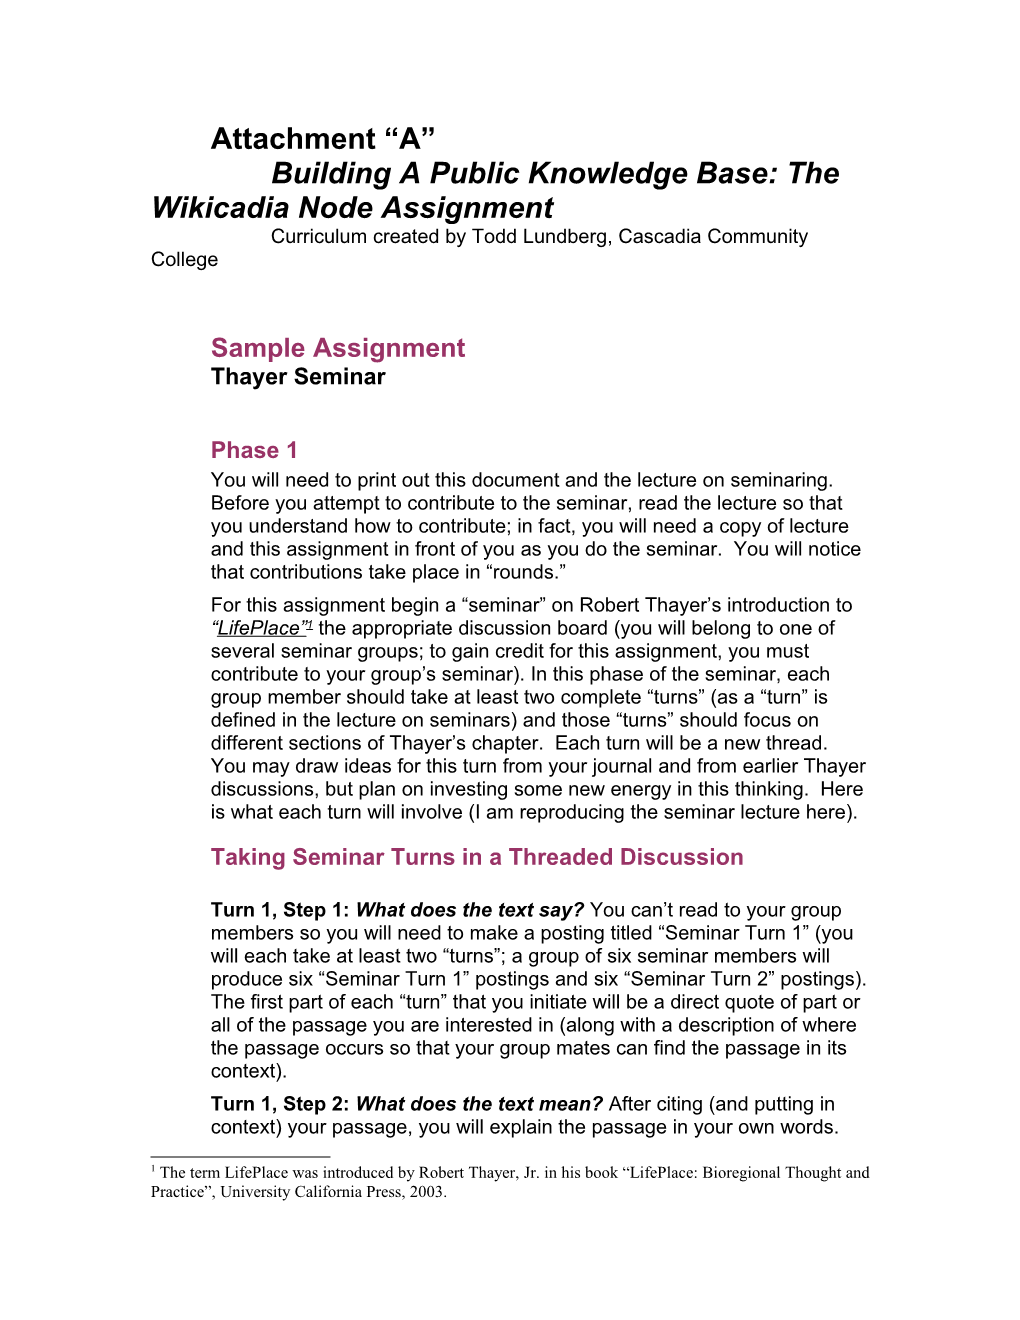 Building a Public Knowledge Base: the Wikicadia Node Assignment